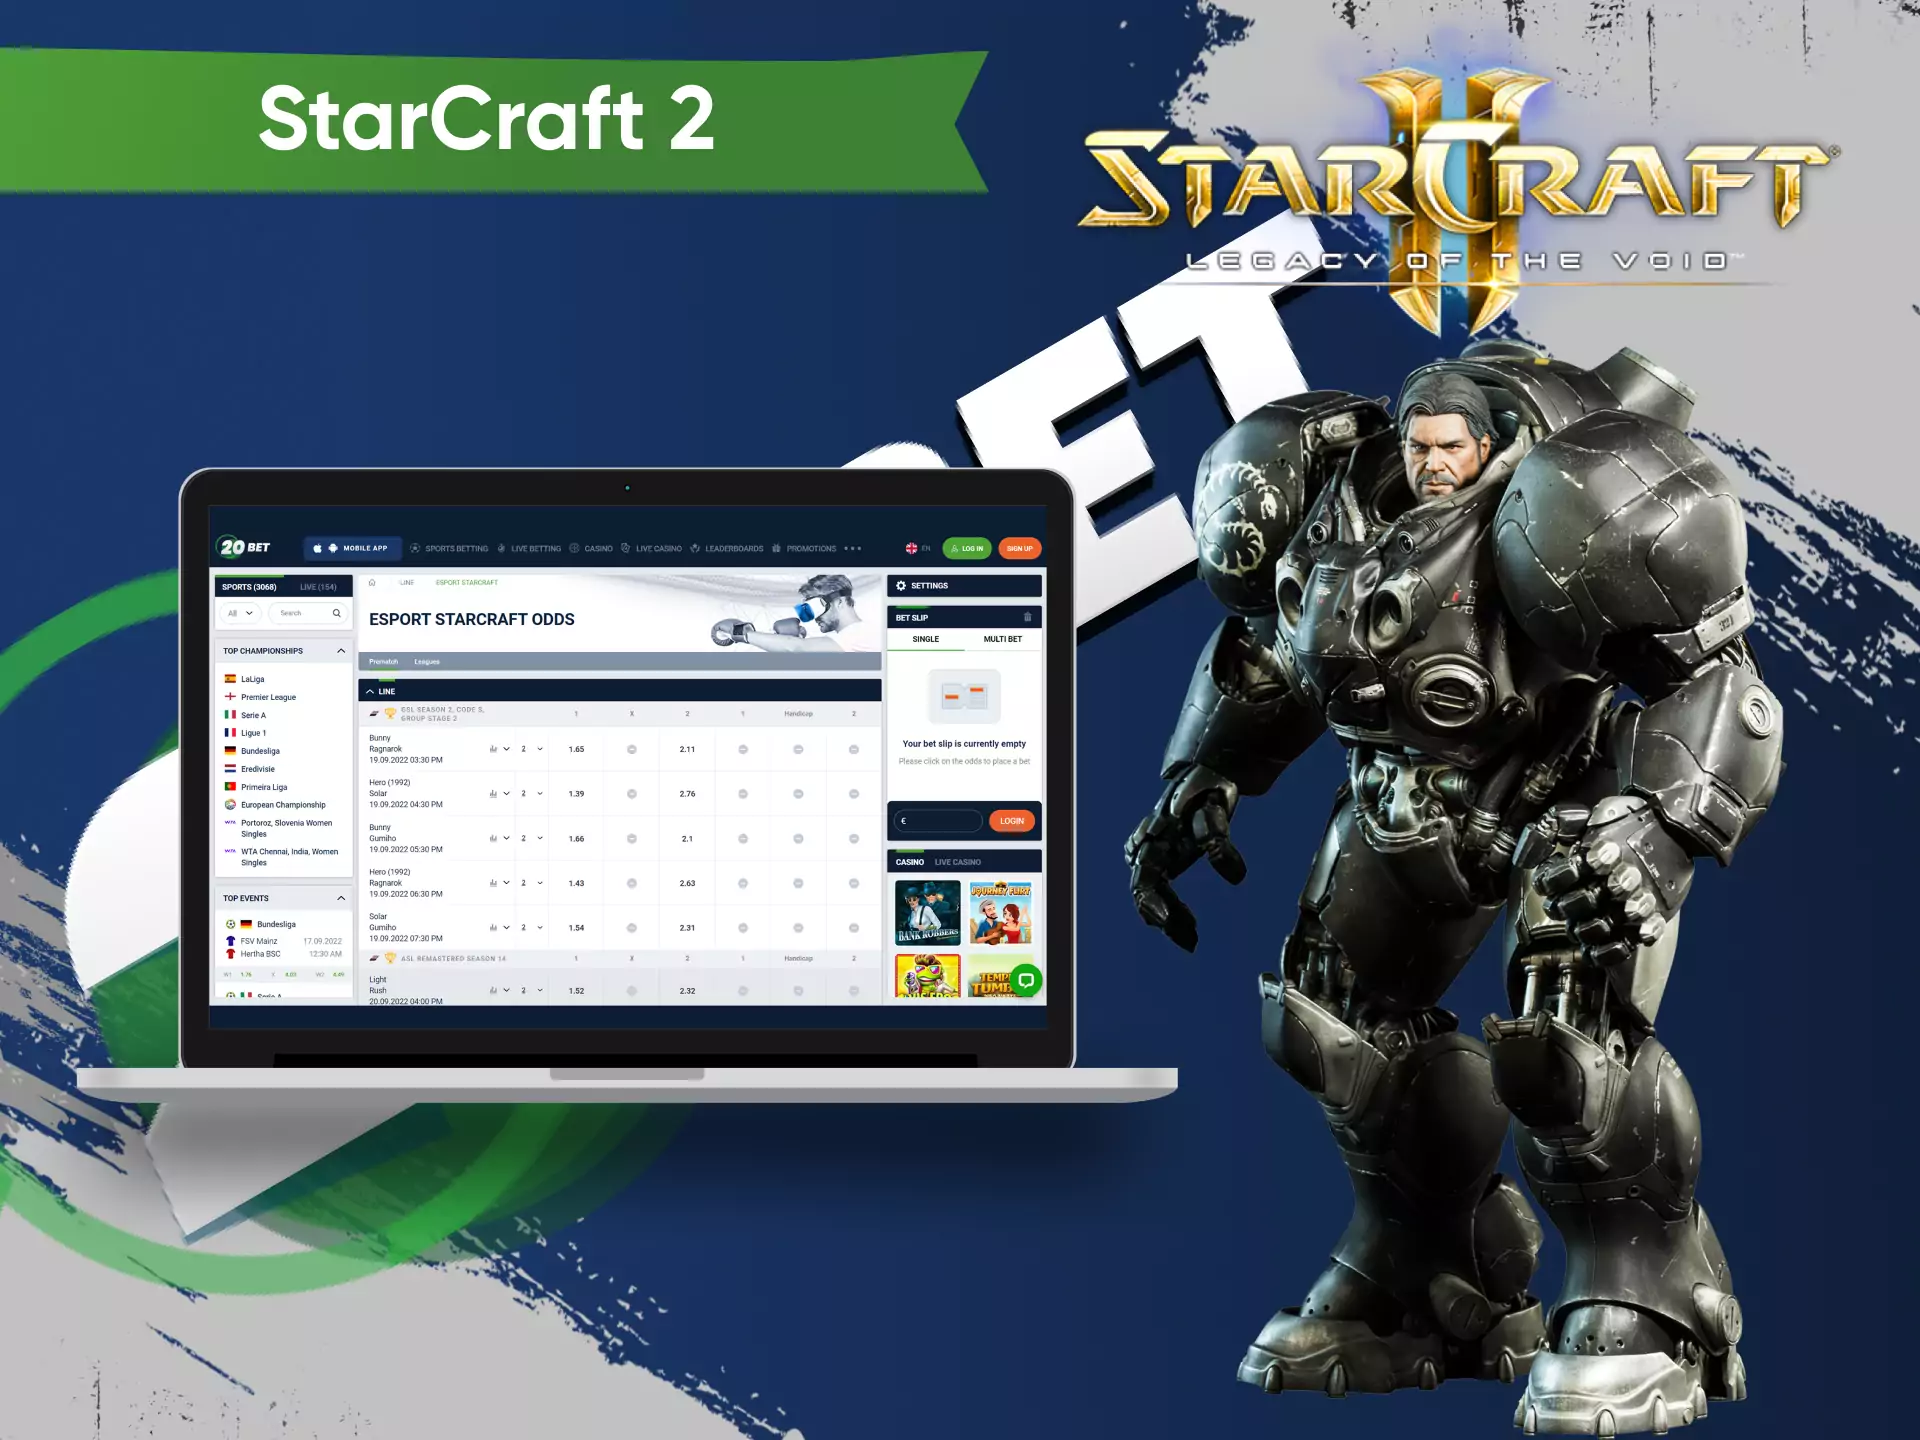 In the esports section of 20bet, you can place bets on Starcraft 2 matches available for betting.